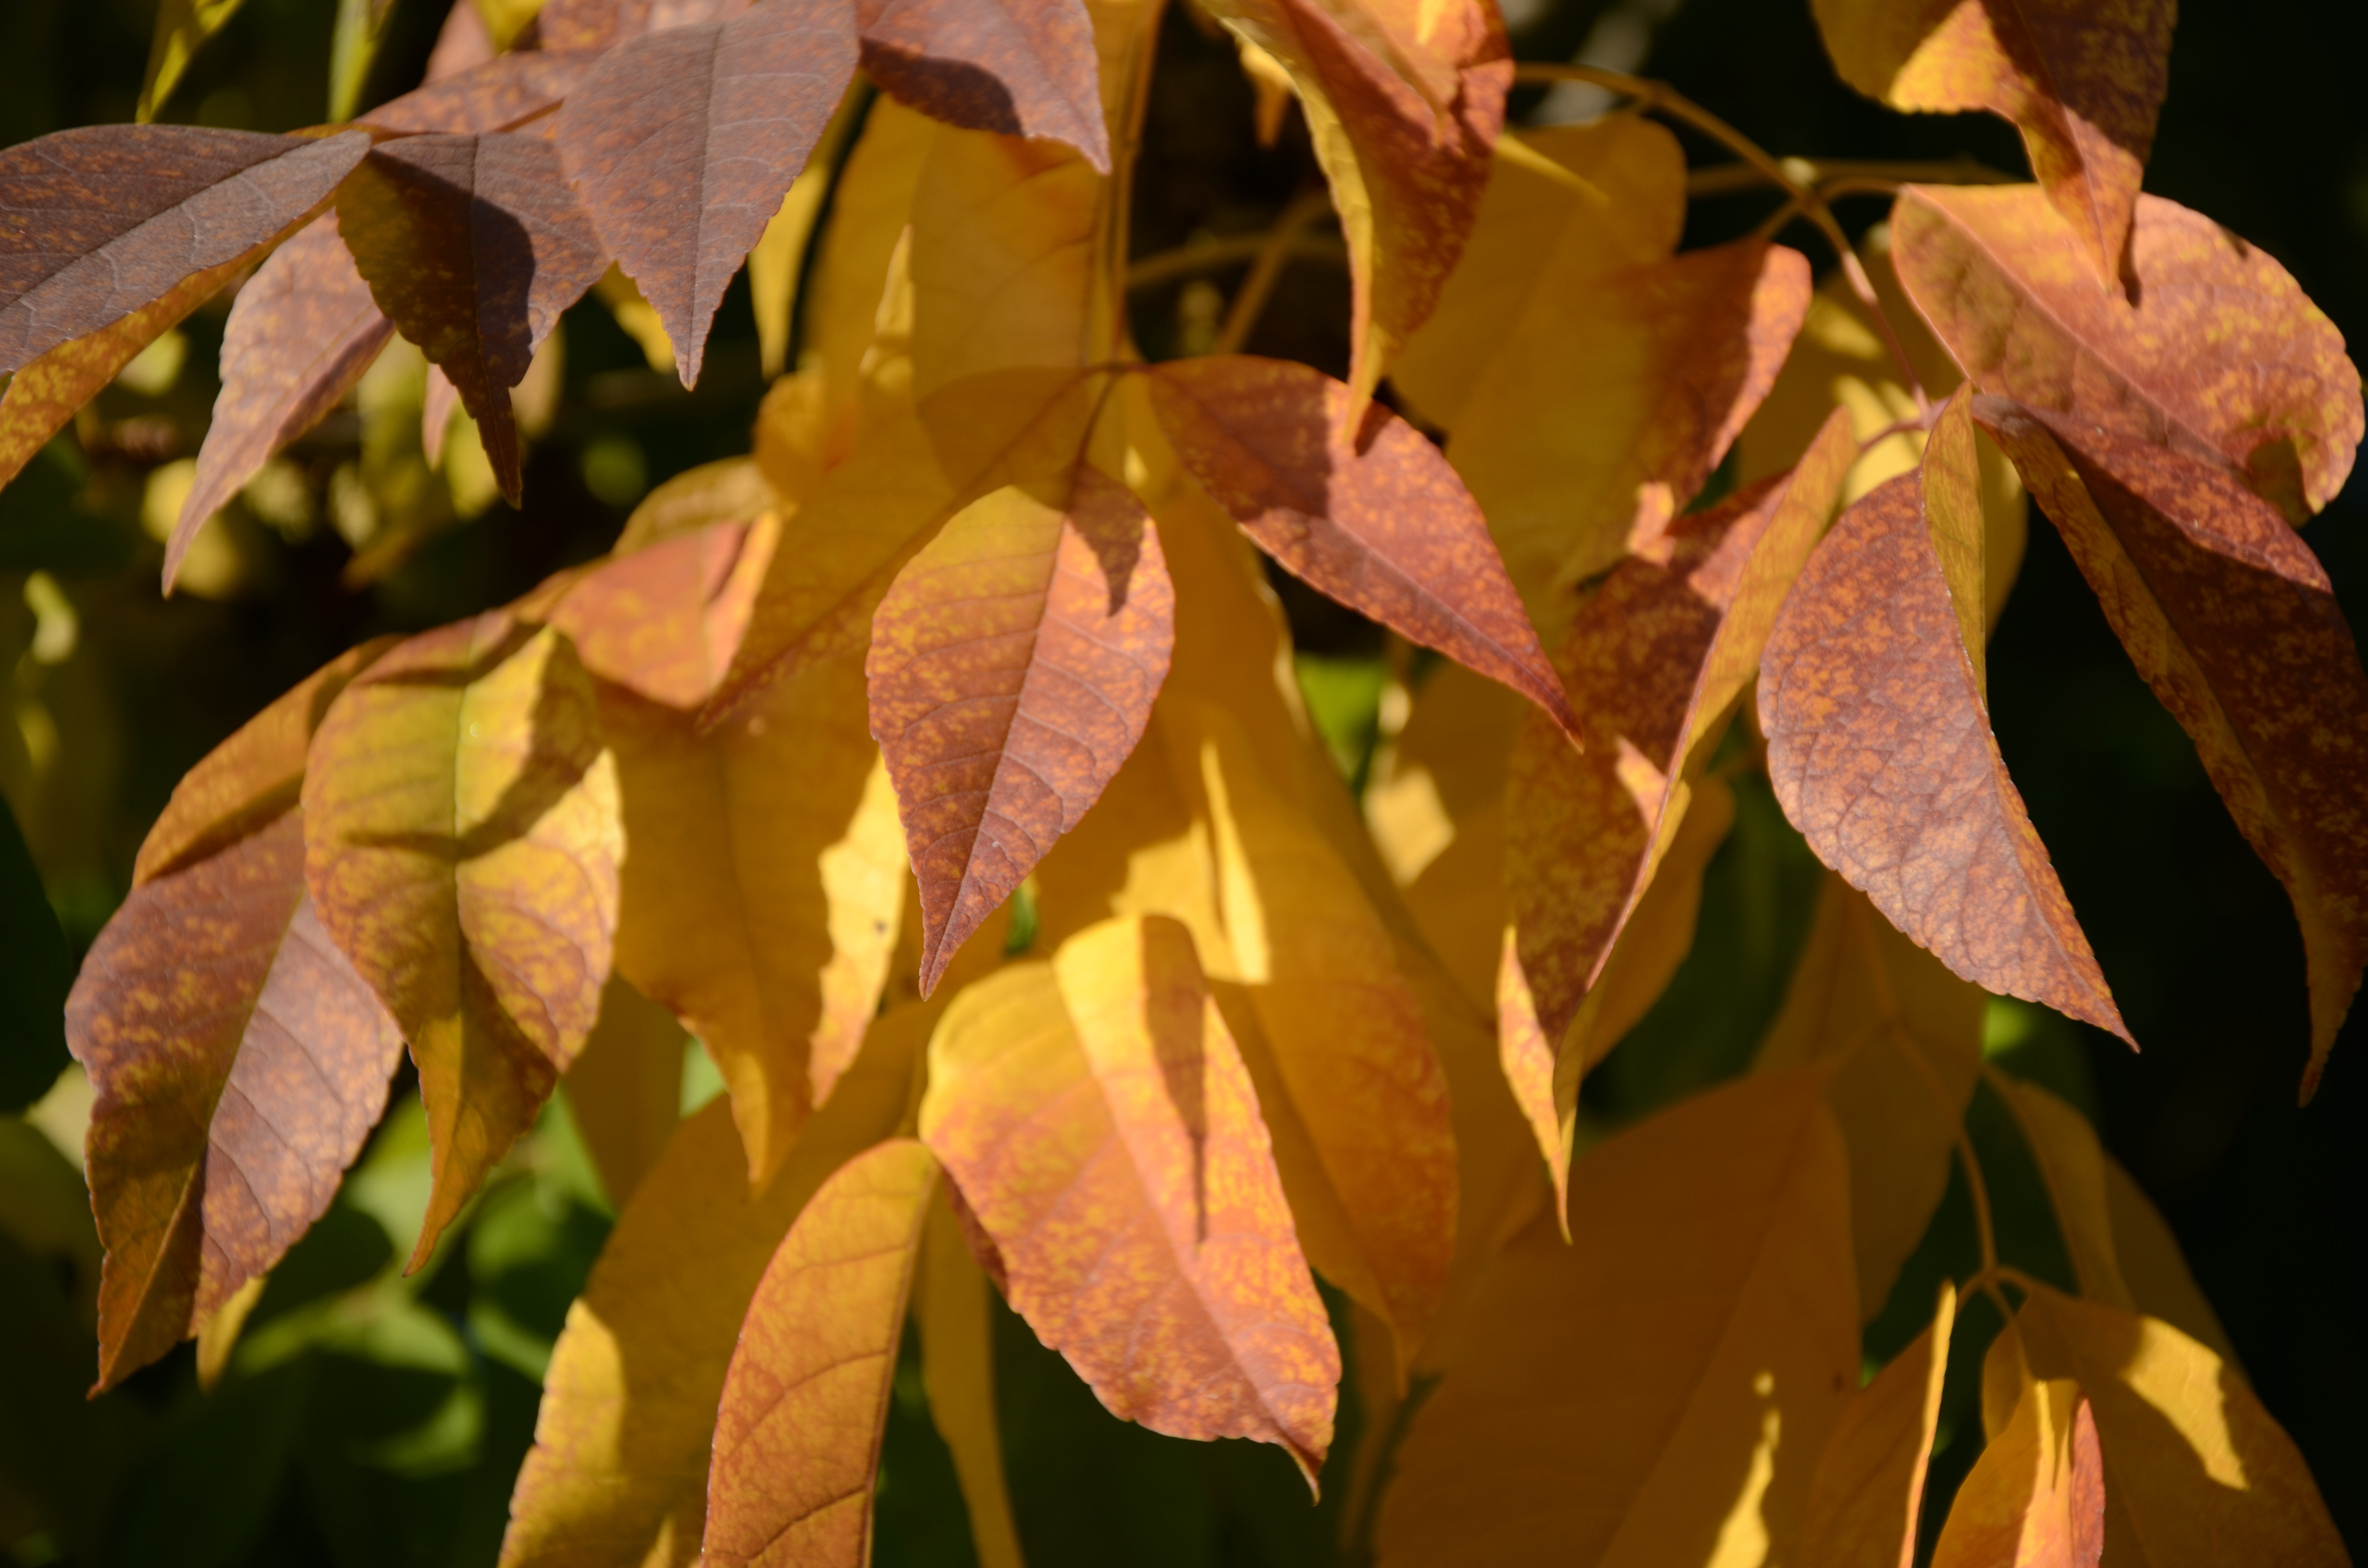 While enjoying Denver's fall color, appreciate our ashes | Be A Smart Ash